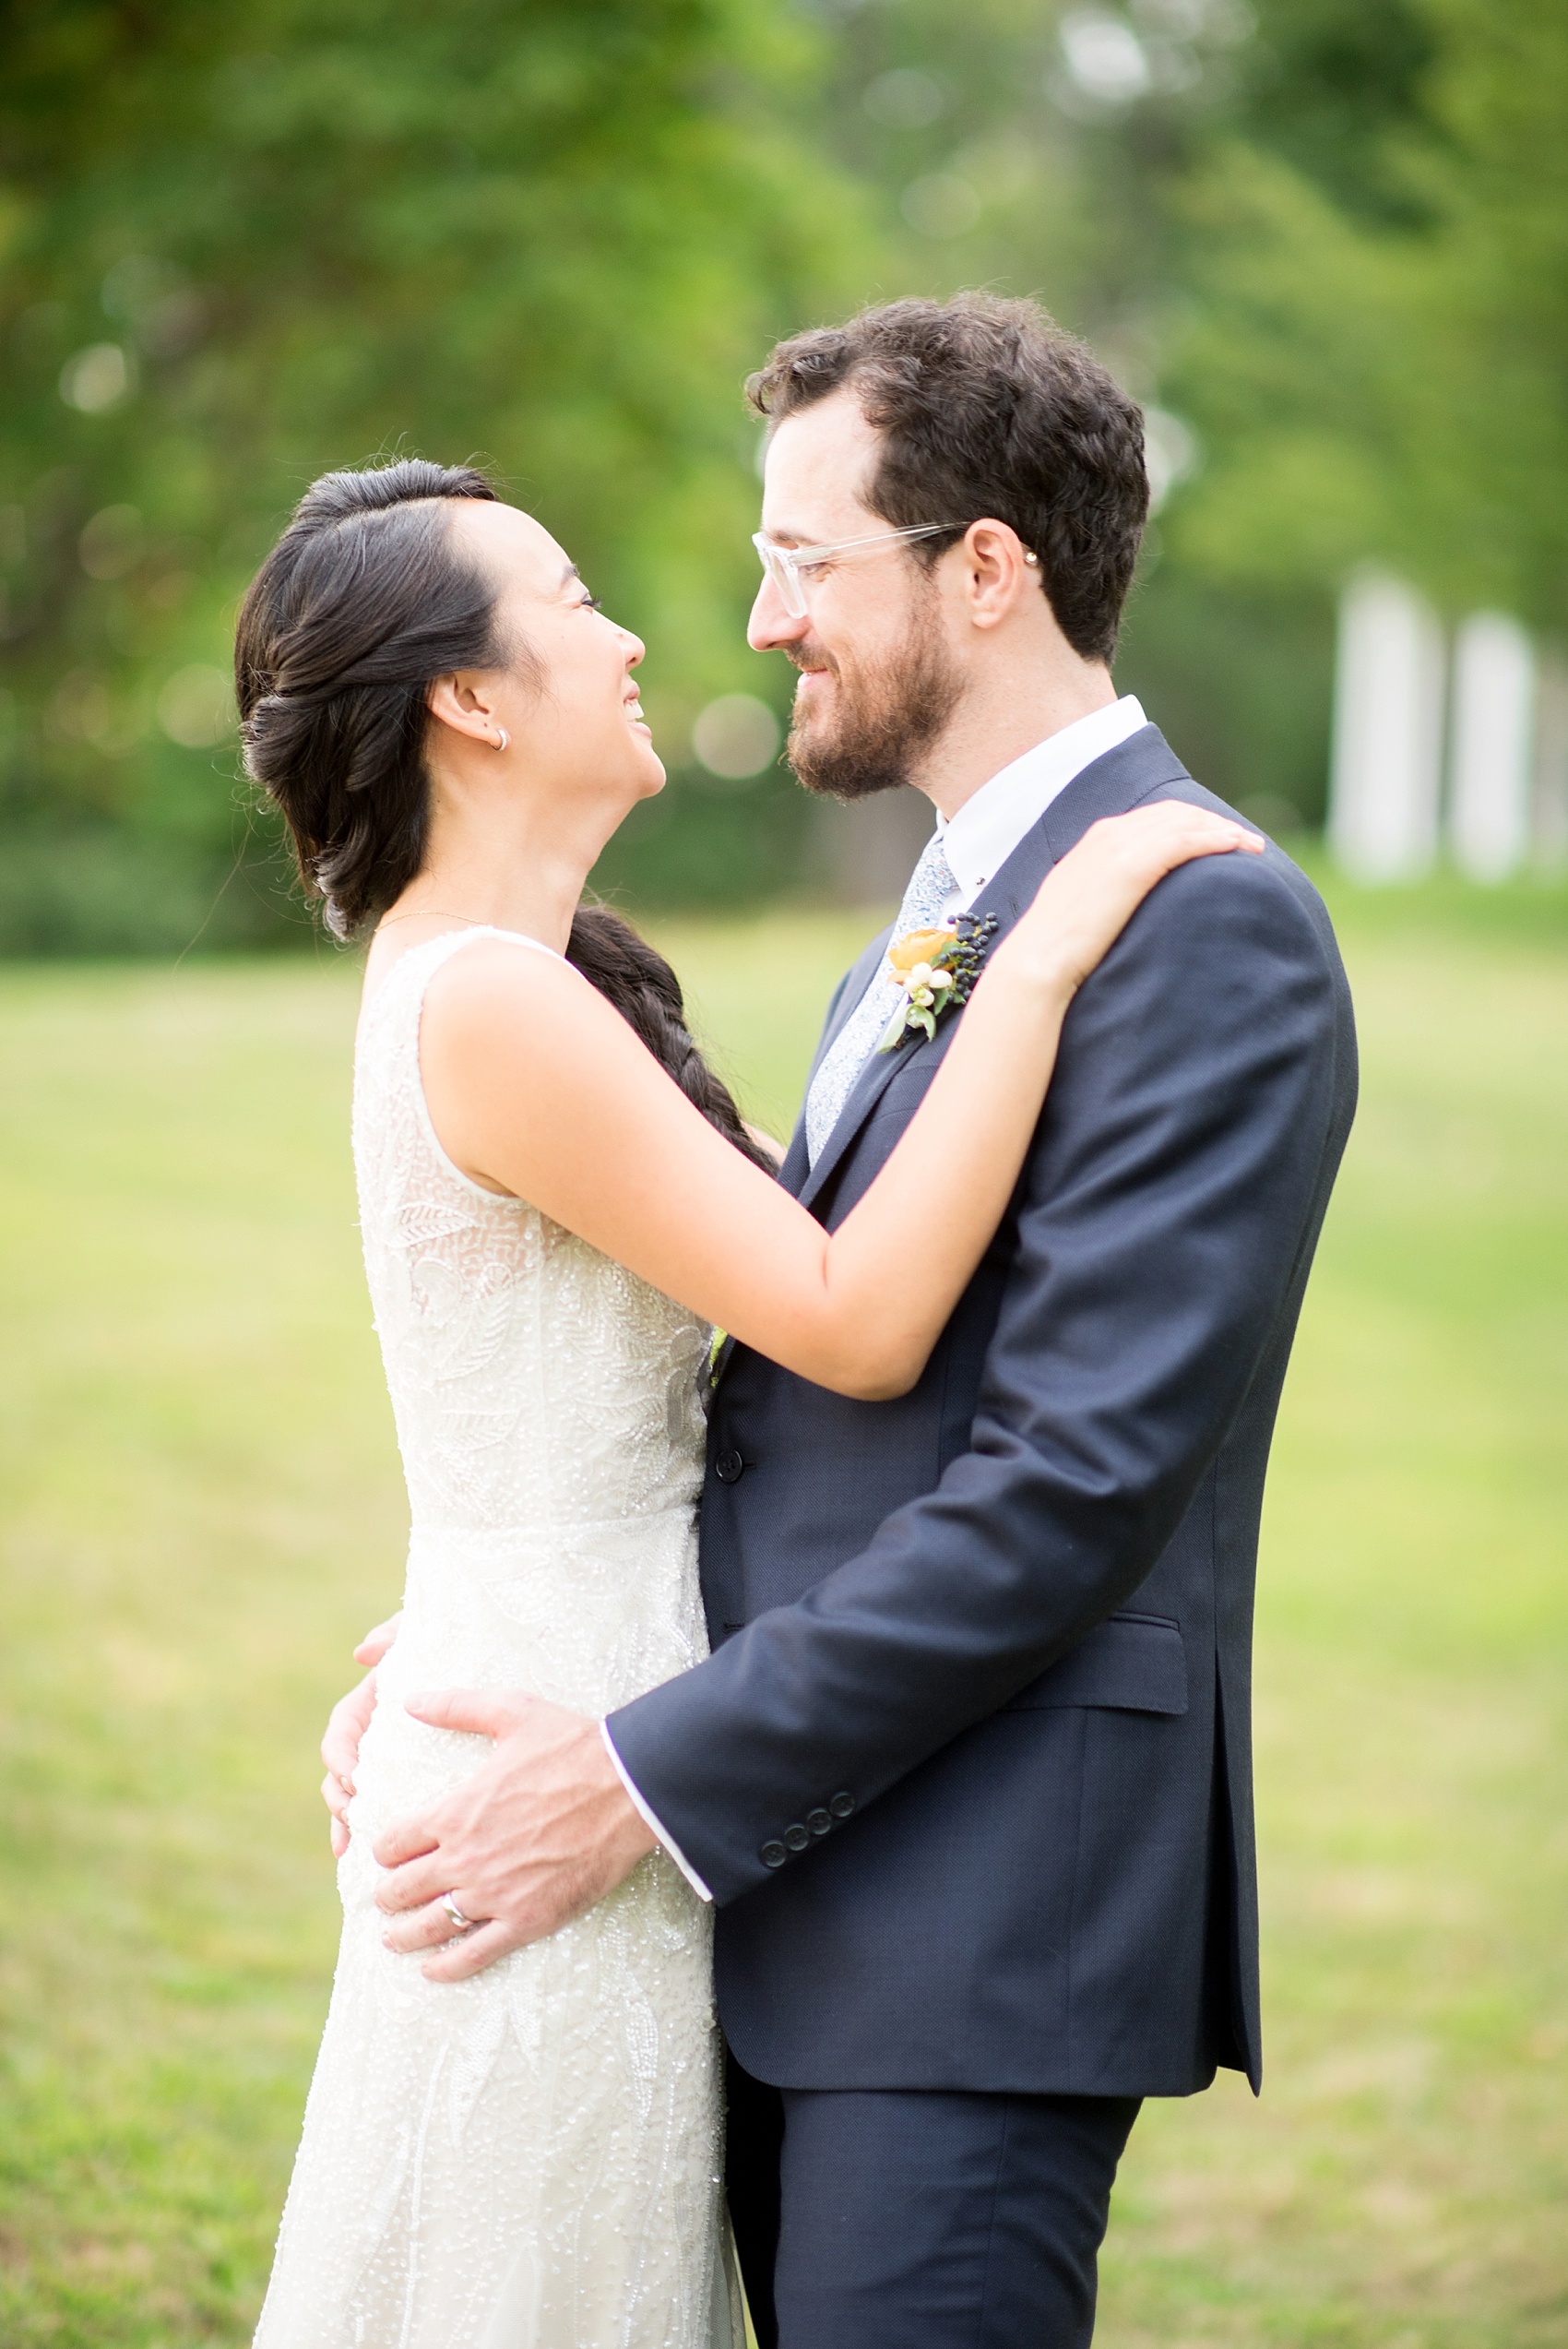 NY wedding at Southwood Estate. Images by Mikkel Paige Photography, NYC wedding photographer. Bride and groom pictures.